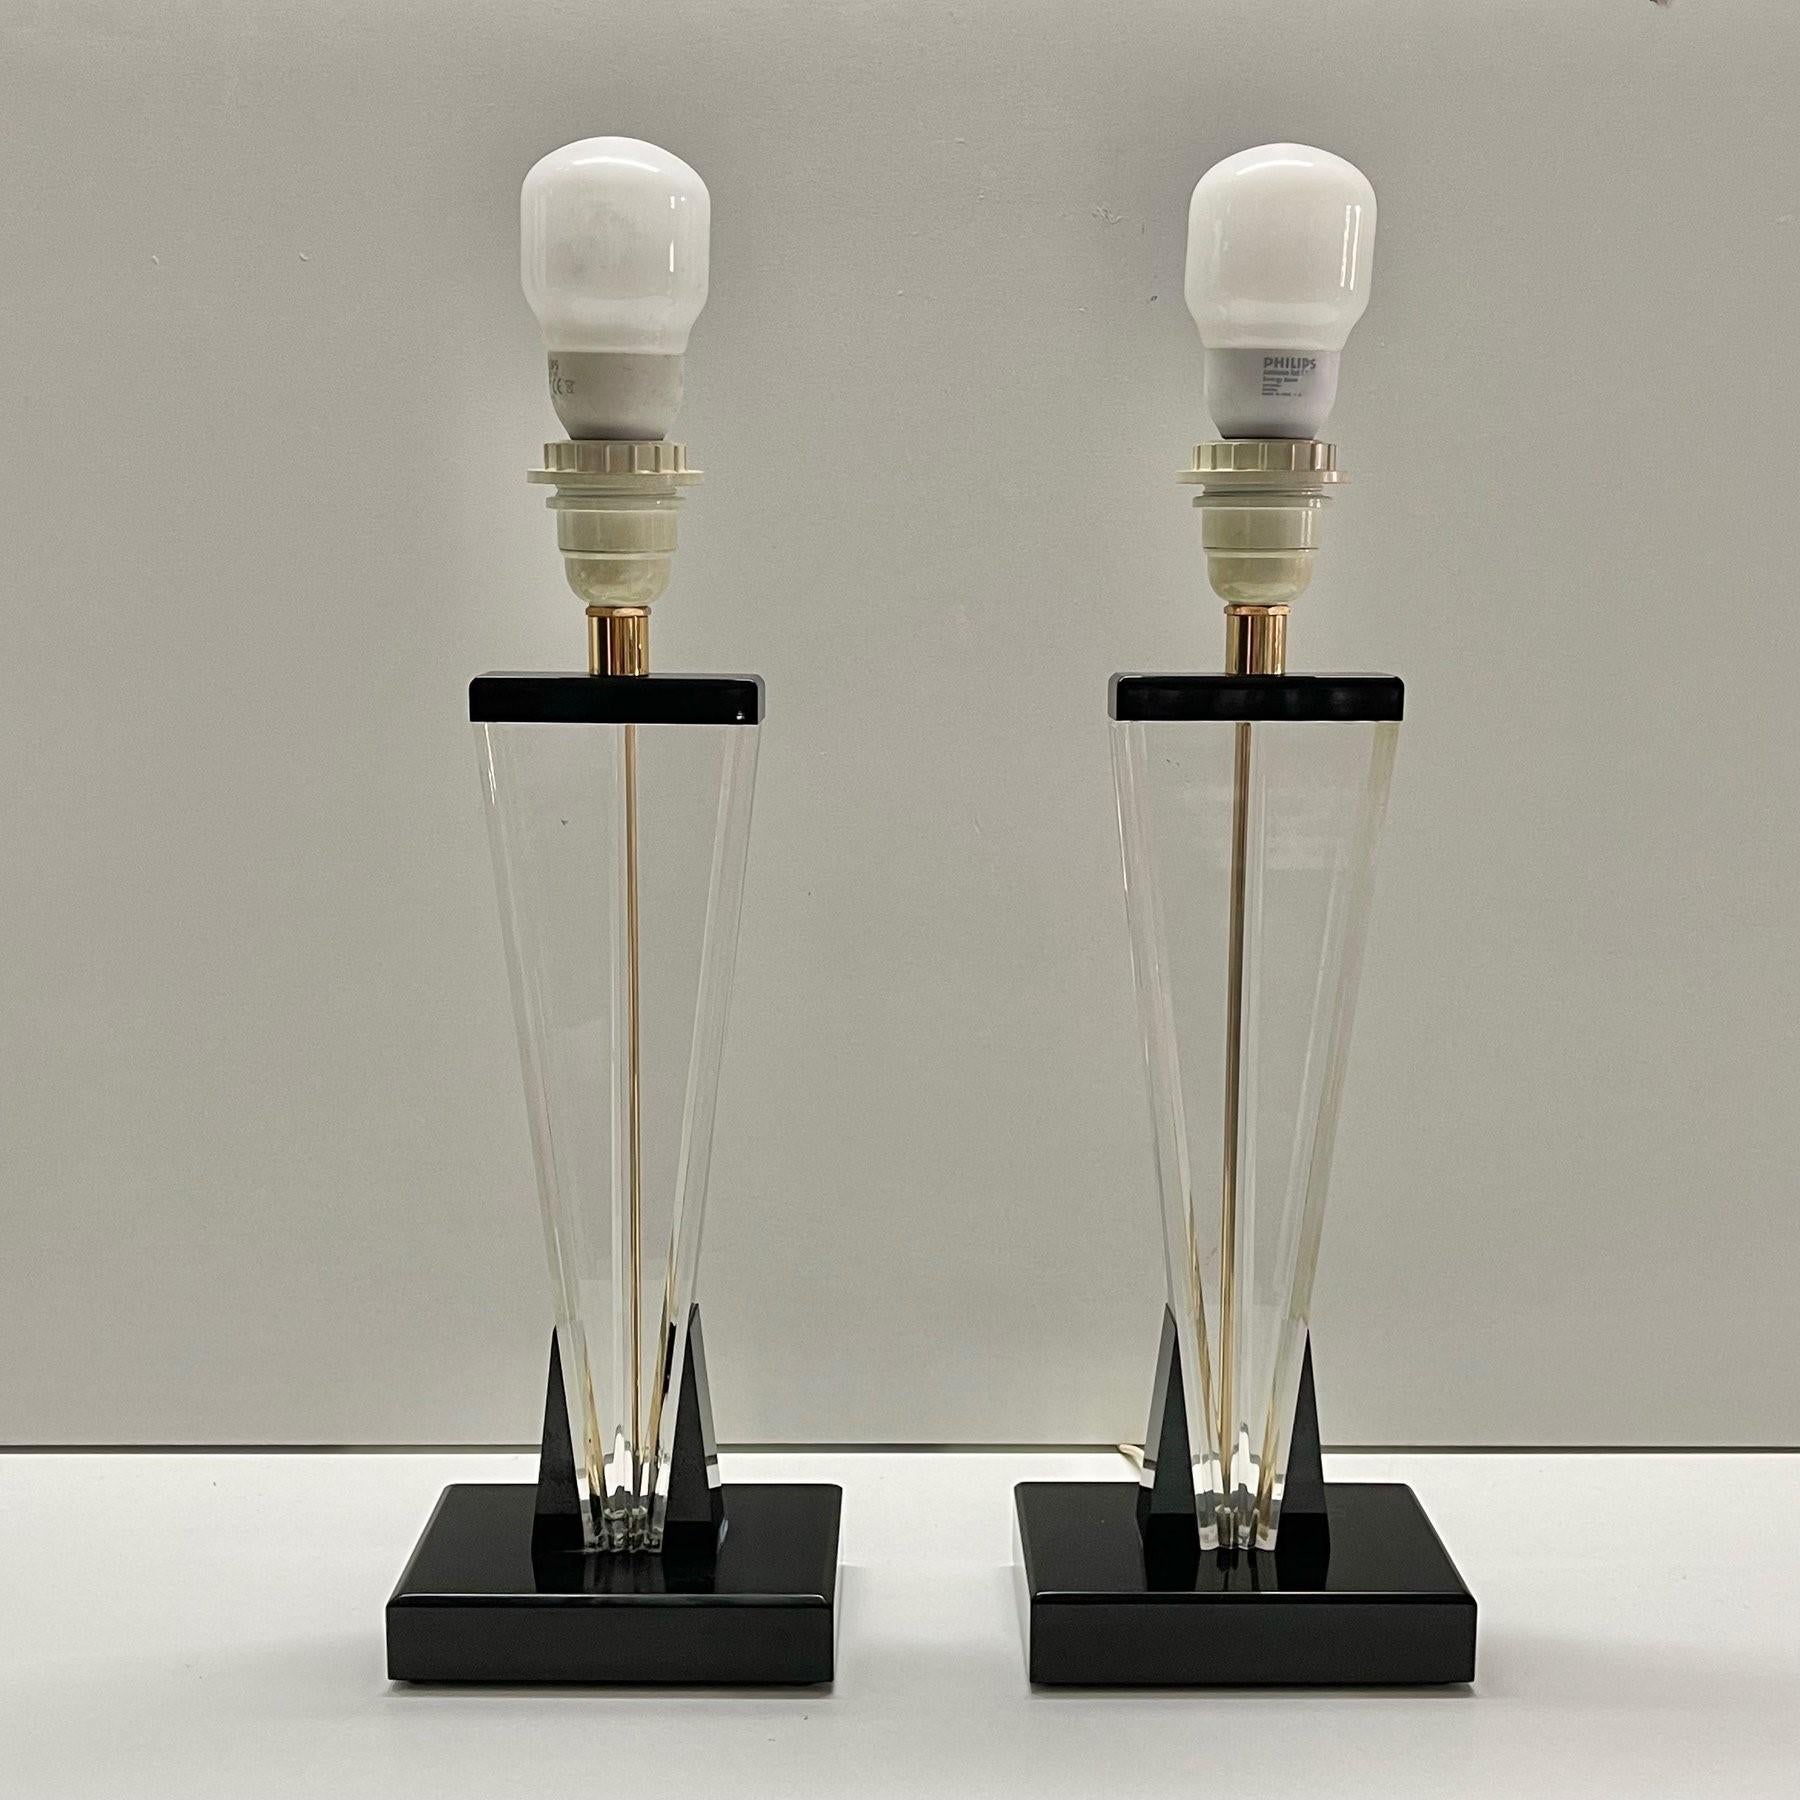 A pair of elegant Recency style table lamps in transparant and black lucite with brass hardware, Italy, 1960s. Both lamps in excelent condition, no damages, new linen shades, fully functional. Each lamp takes one E27 large sized screw bulb up to